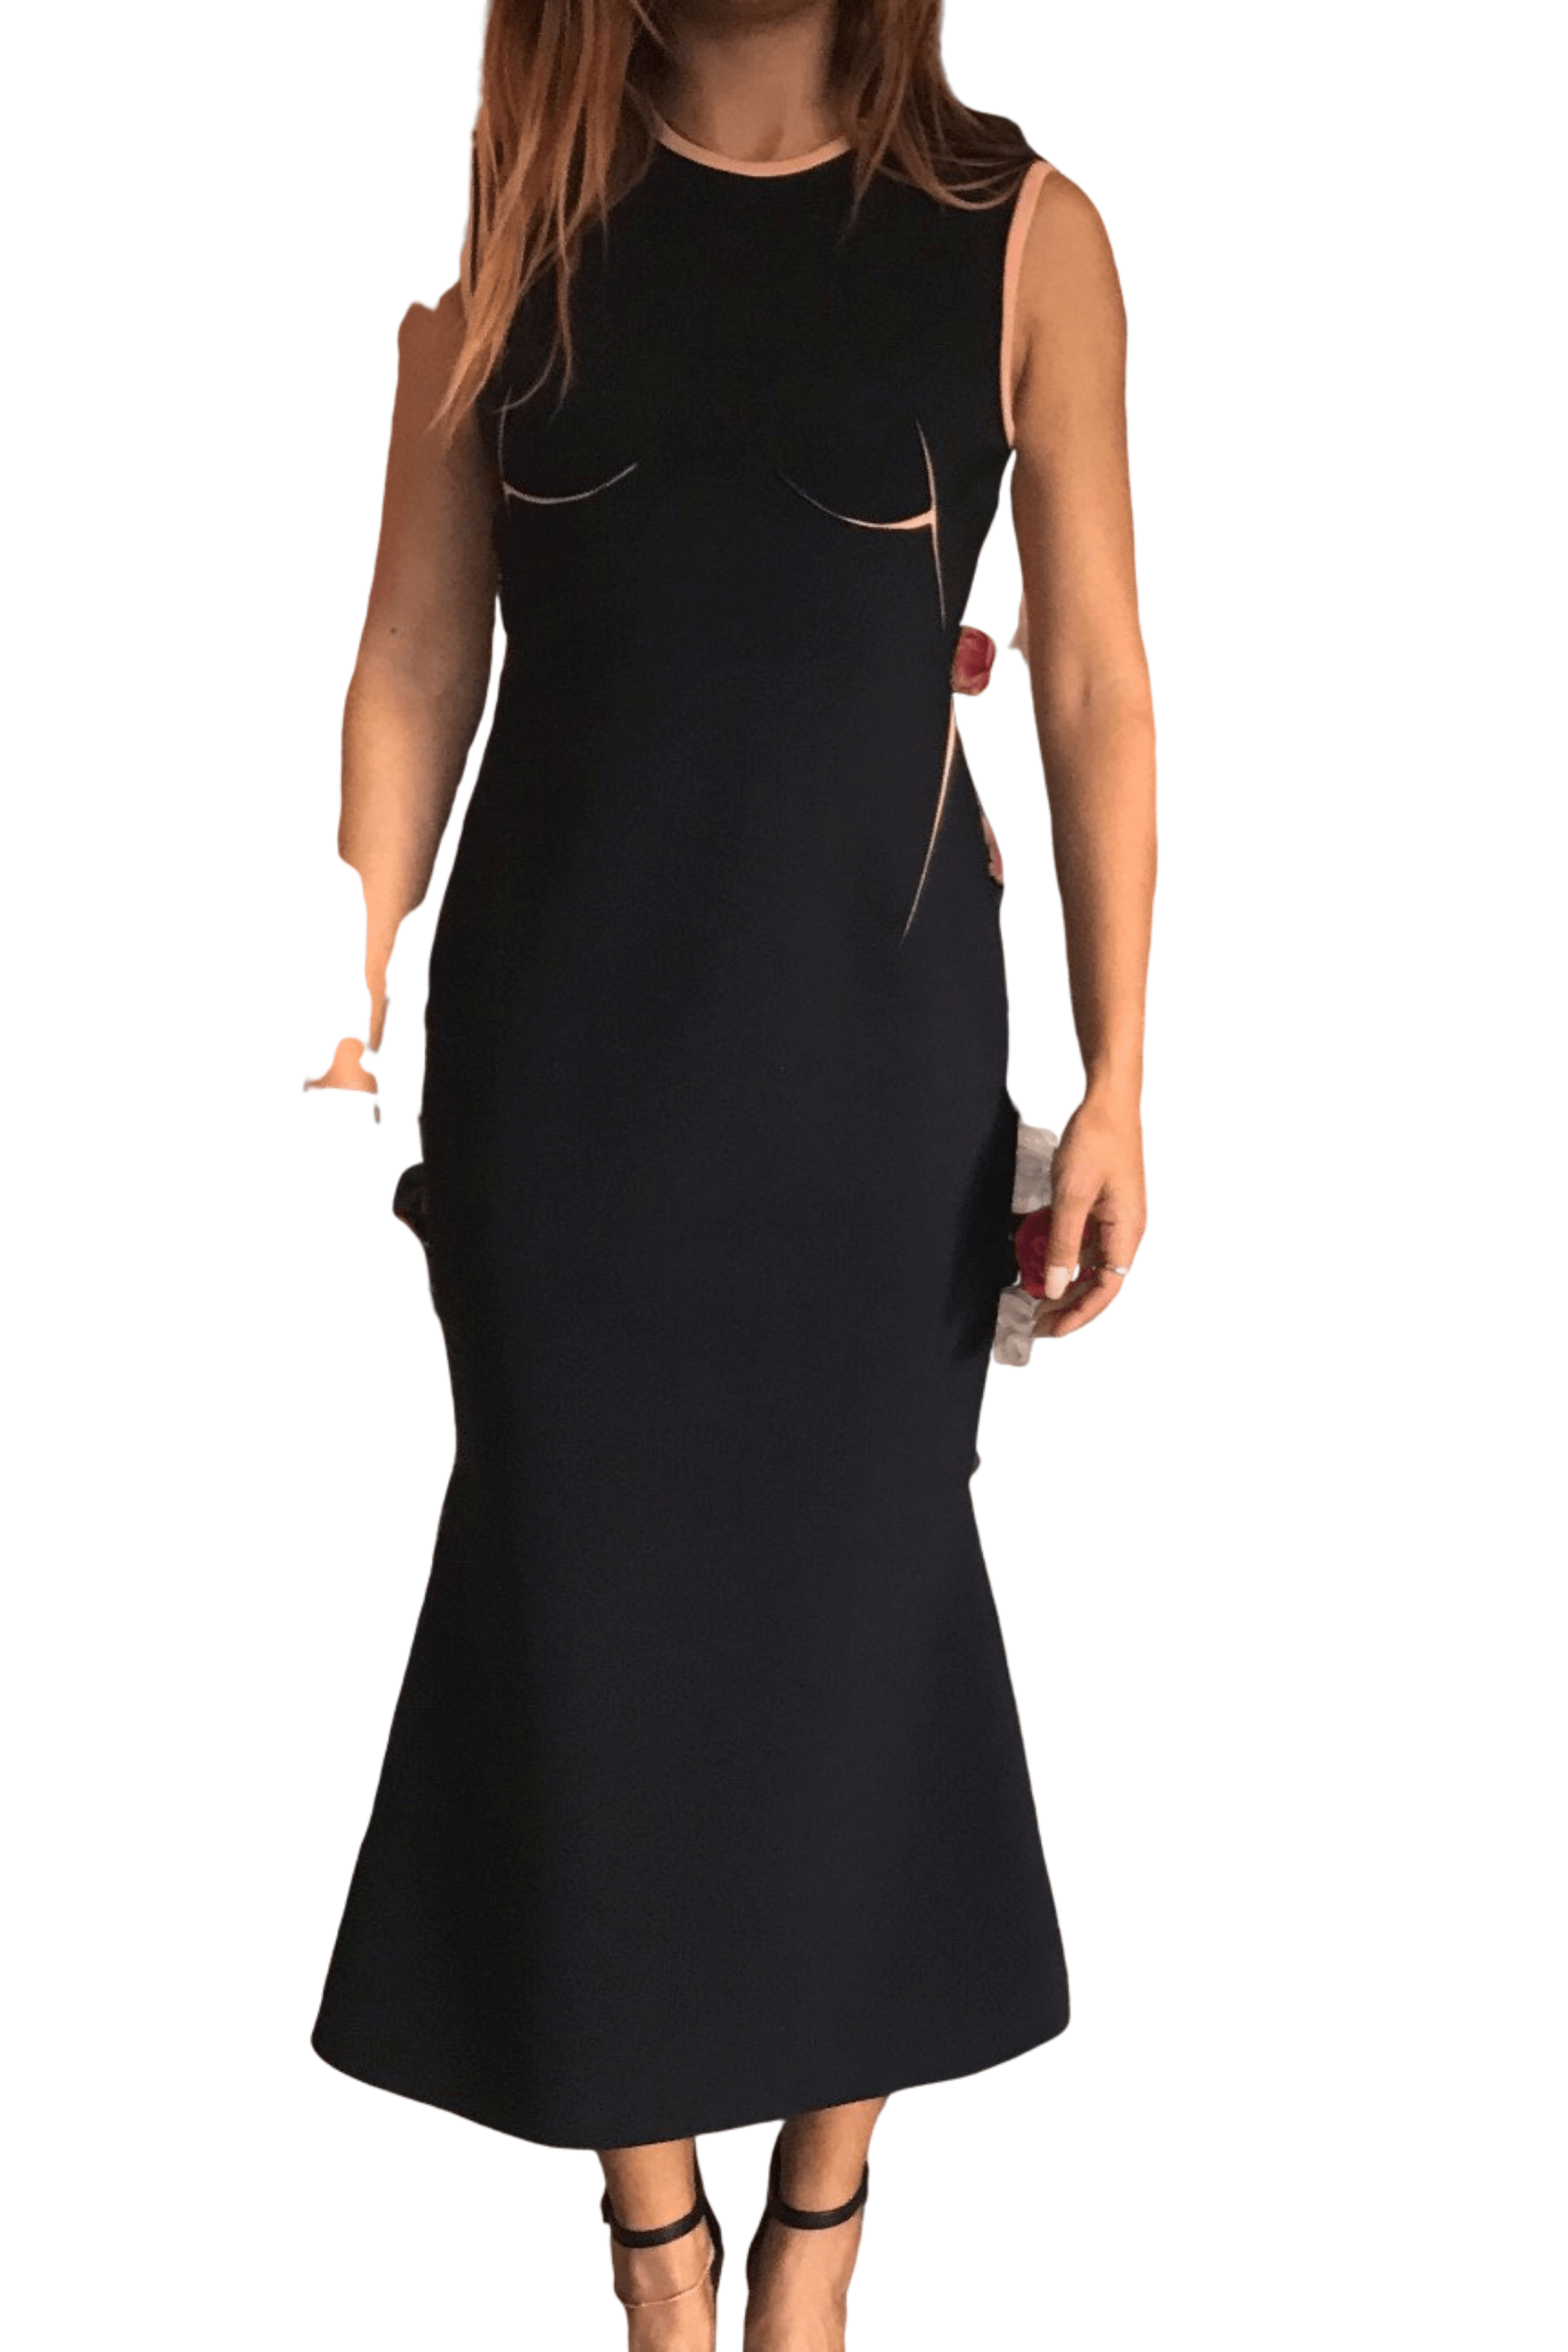 Dion Lee DION LEE Power Stretch Cracked Seam Dress RRP [title]590 - dion-lee-power-stretch-cracked-seam-dress-rrp-90-dress-for-a-night-30754190.png